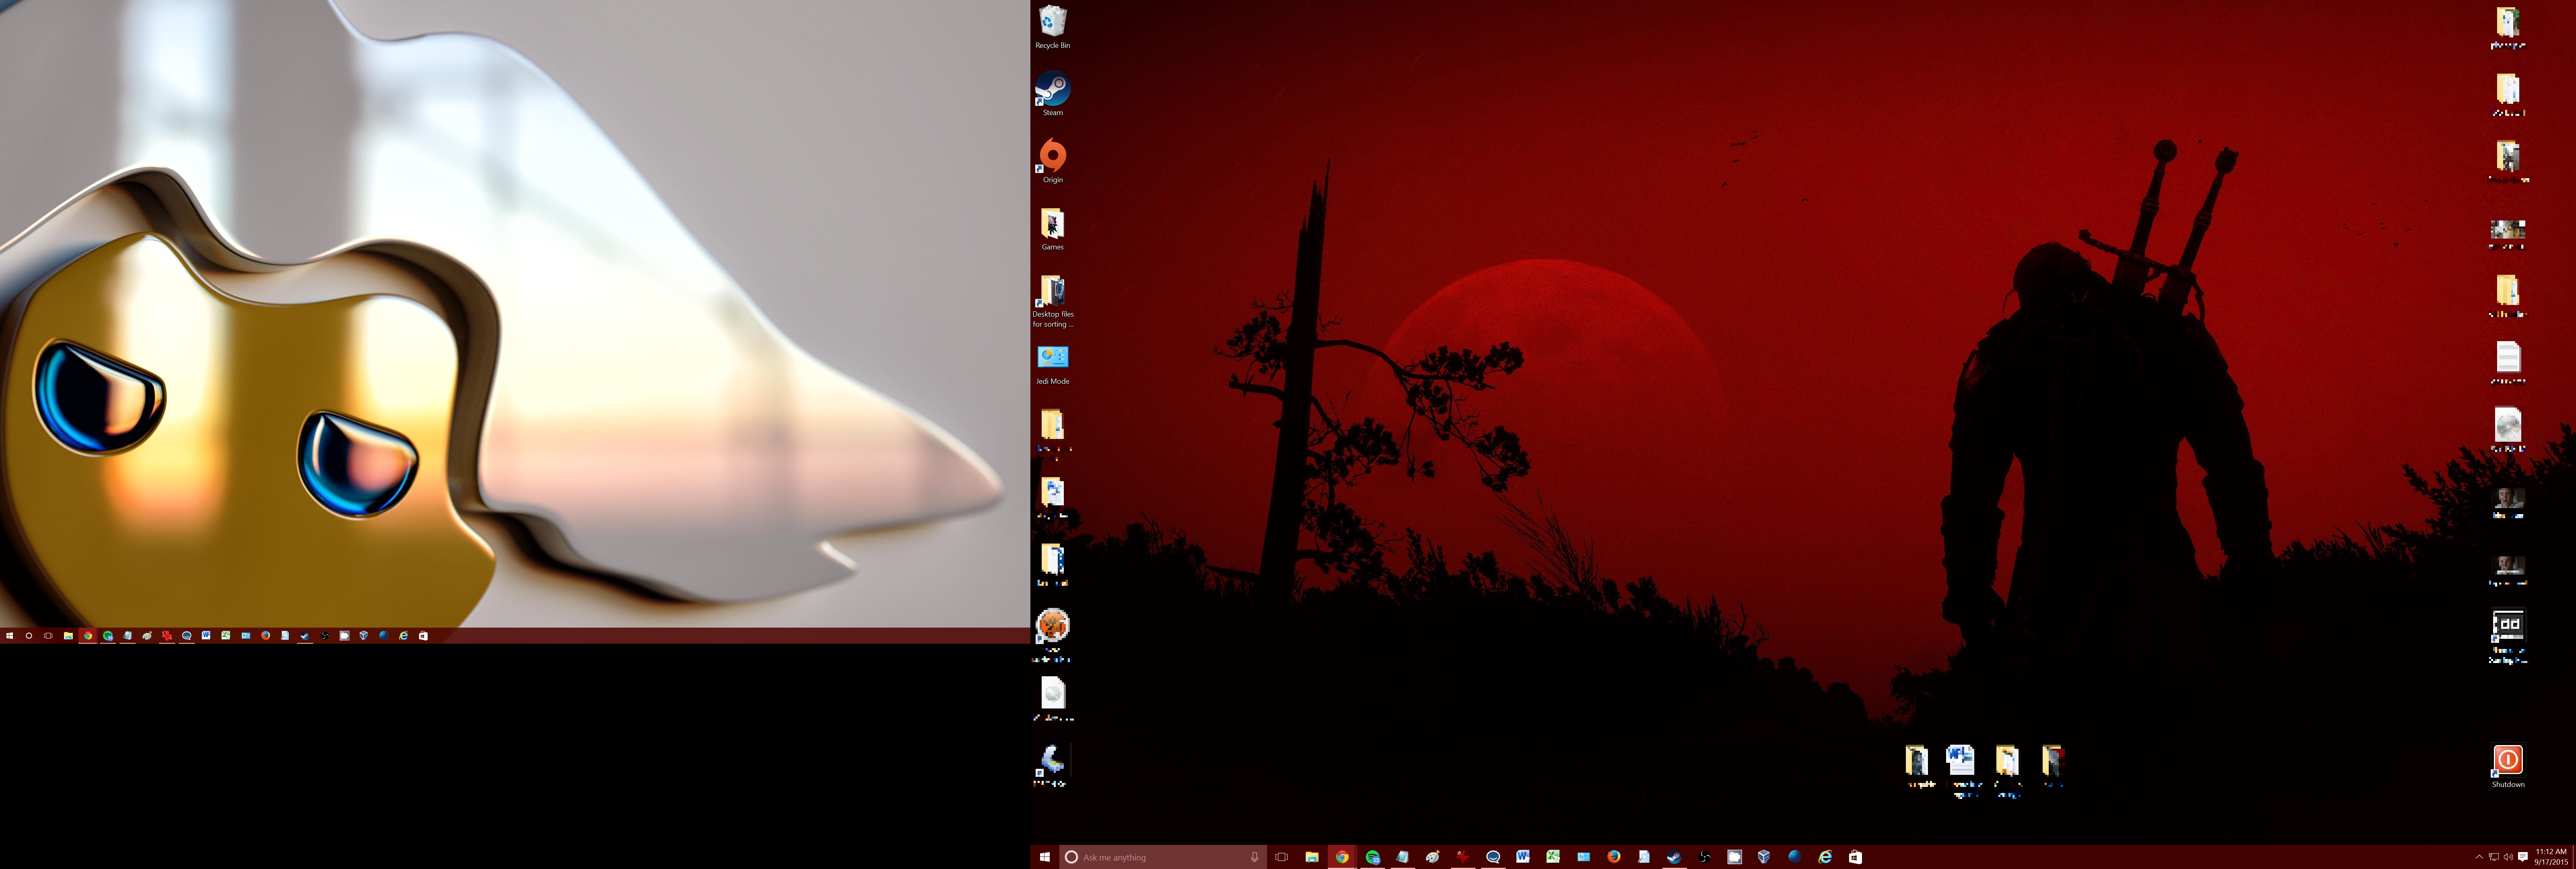 How To Set Different Wallpapers For Multiple Monitors In Windows 10